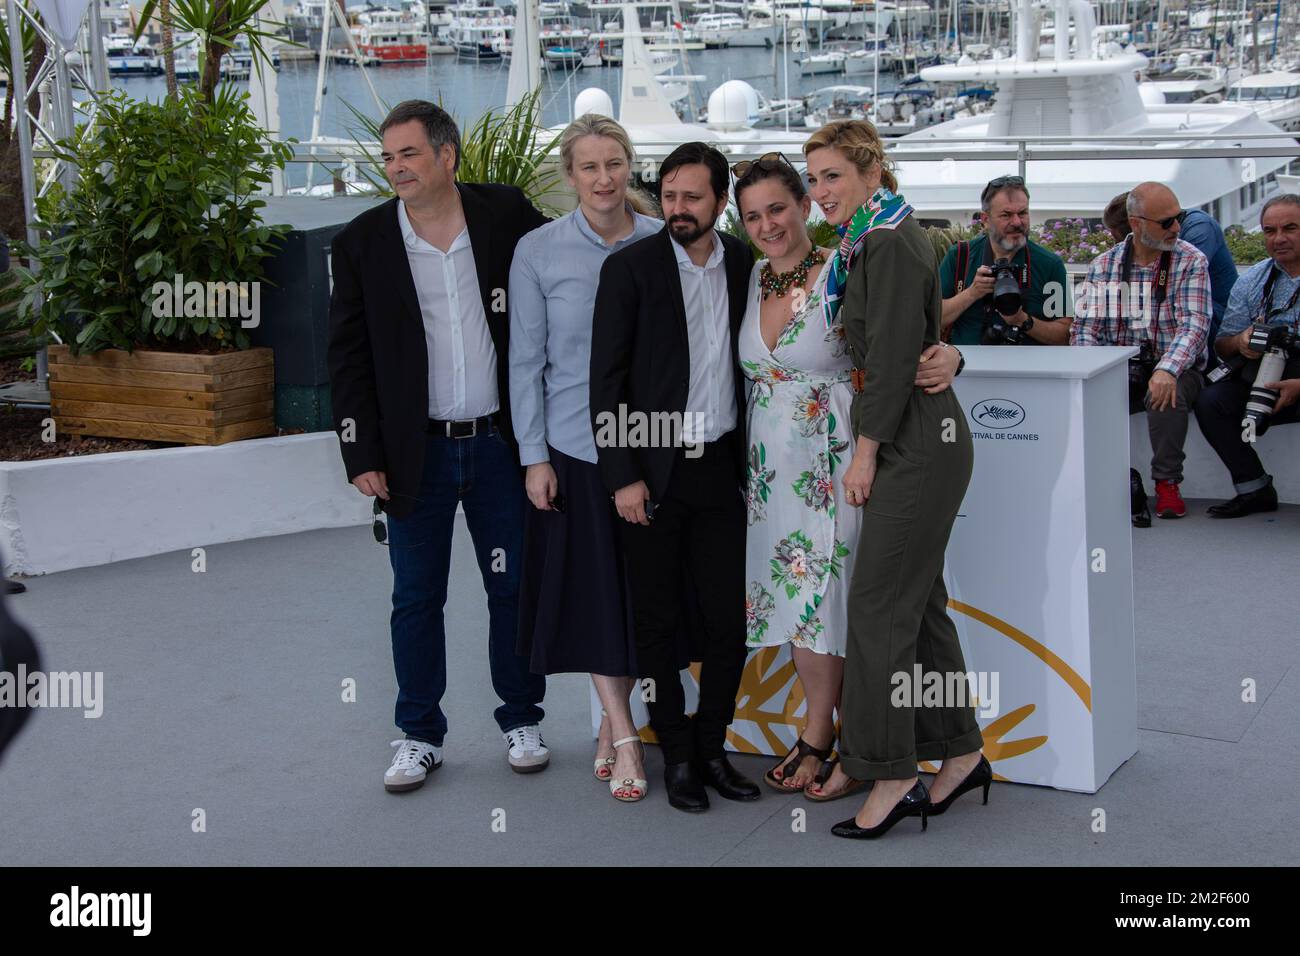 Producers Jean-Raymond Garcia , Nadia Turincev Director Alejandro Fadel producer Agustina Llambi-Campbell and Julie Gayet at the photocall for the 'Murder Me, Monster (Meurs, Monstre, Meurs)' during the 71st annual Cannes Film Festival at Palais des Festivals | Le producteur Jean-Raymond Garcia , Nadia Turincev le réalisateur Alejandro Fadel la productrice Agustina Llambi-Campbell et Julie Gayet au photocall de 'Murder Me, Monstre, Monster (Meurs, Monstre, Meurs)' lors du 71ème Festival de Cannes au Palais des Festivals. 13/05/2018 Stock Photo